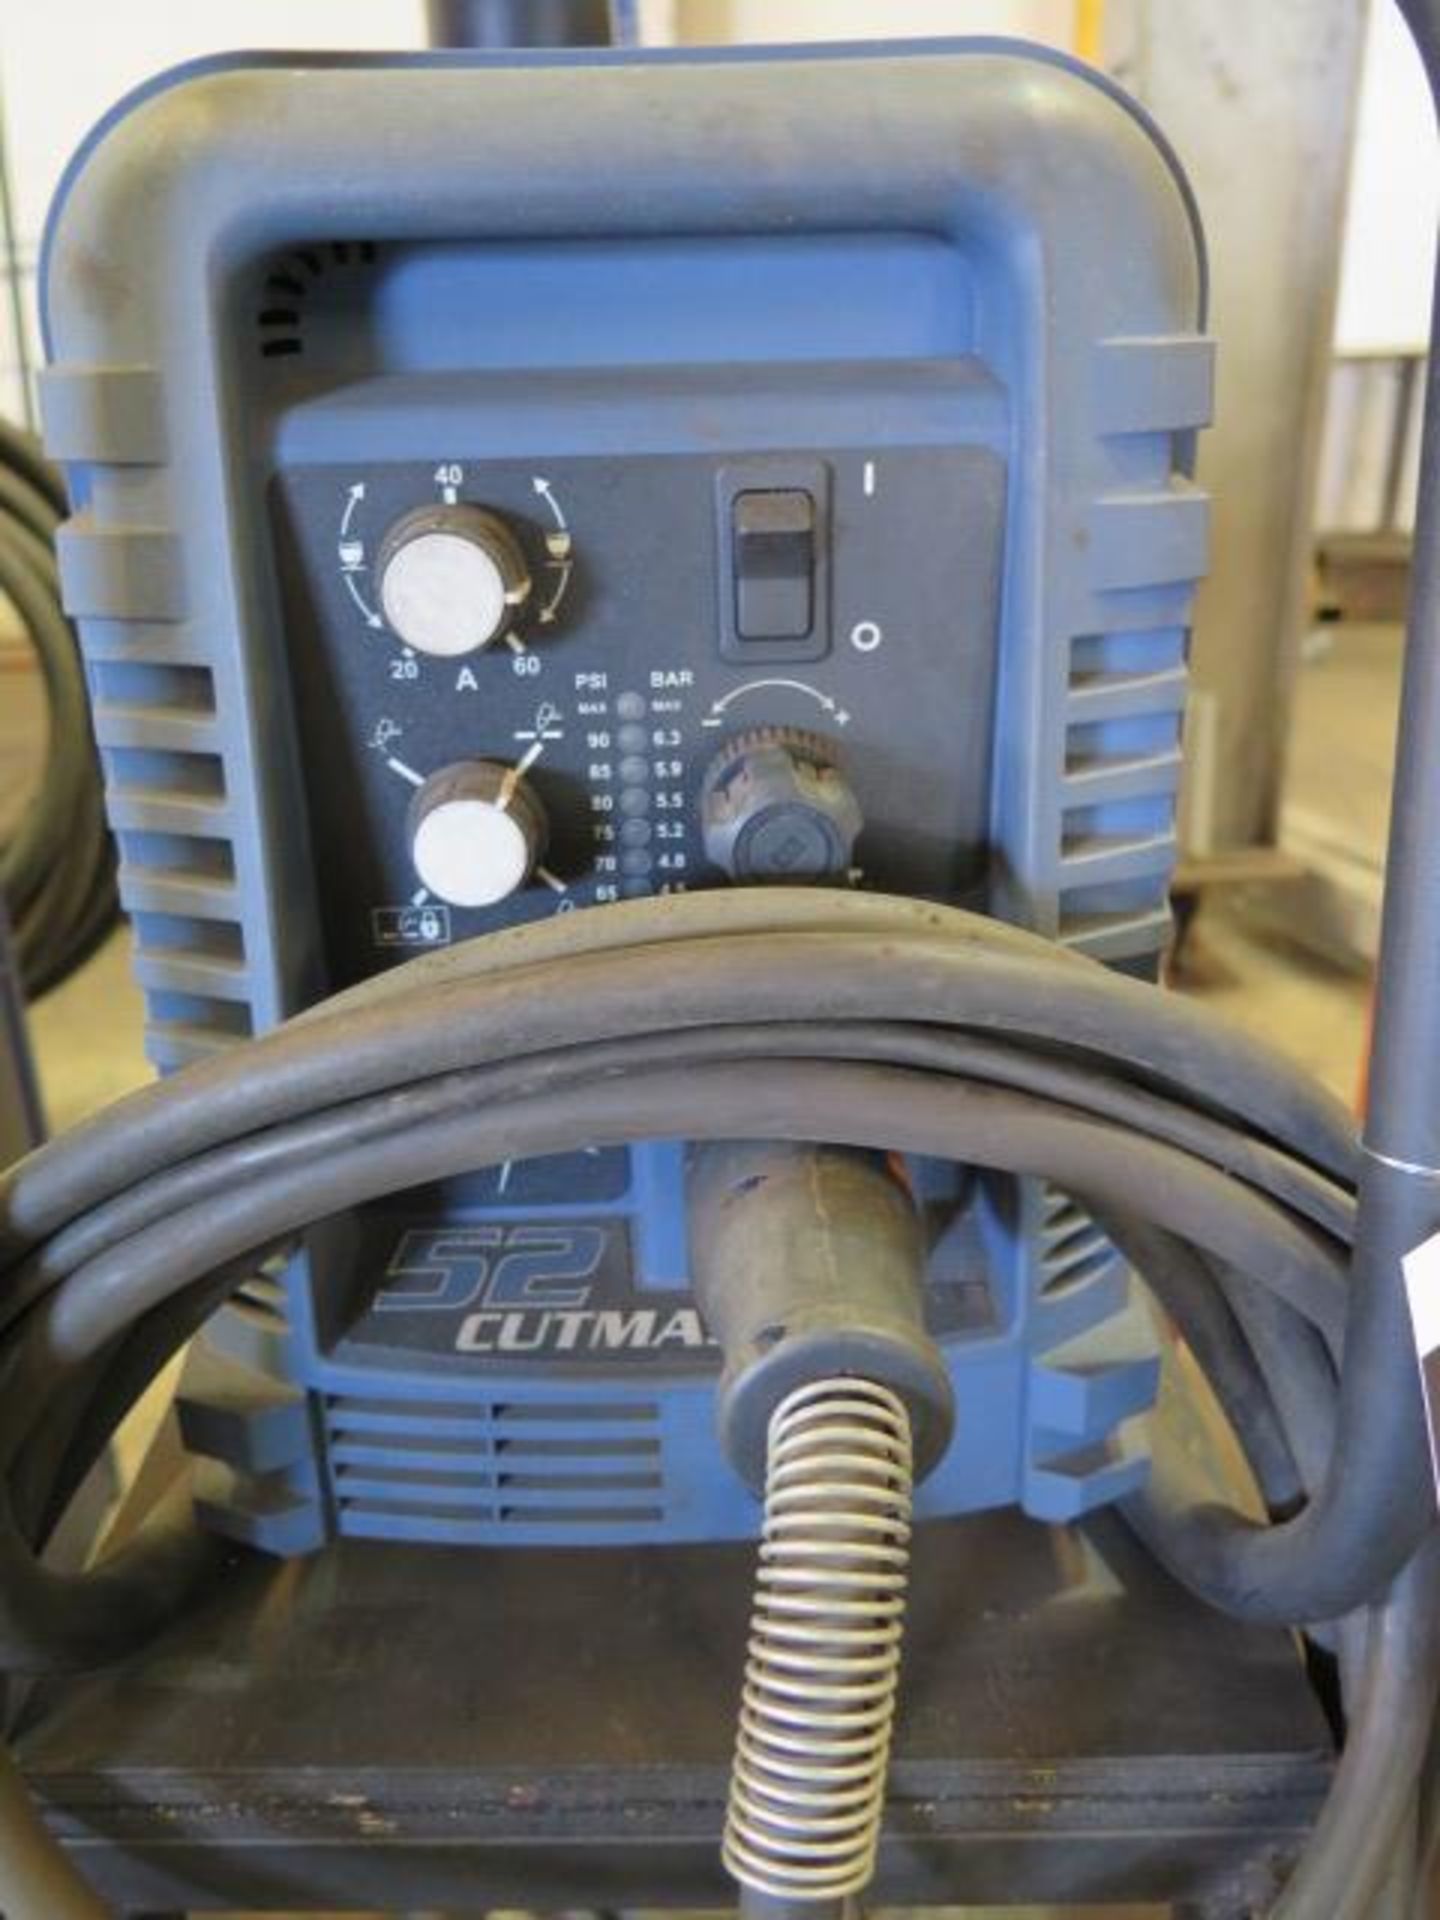 Thermal Dynamics Cutmaster 52 Plasma Cutting Power Source w/ Cart (SOLD AS-IS - NO WARRANTY) - Image 5 of 8